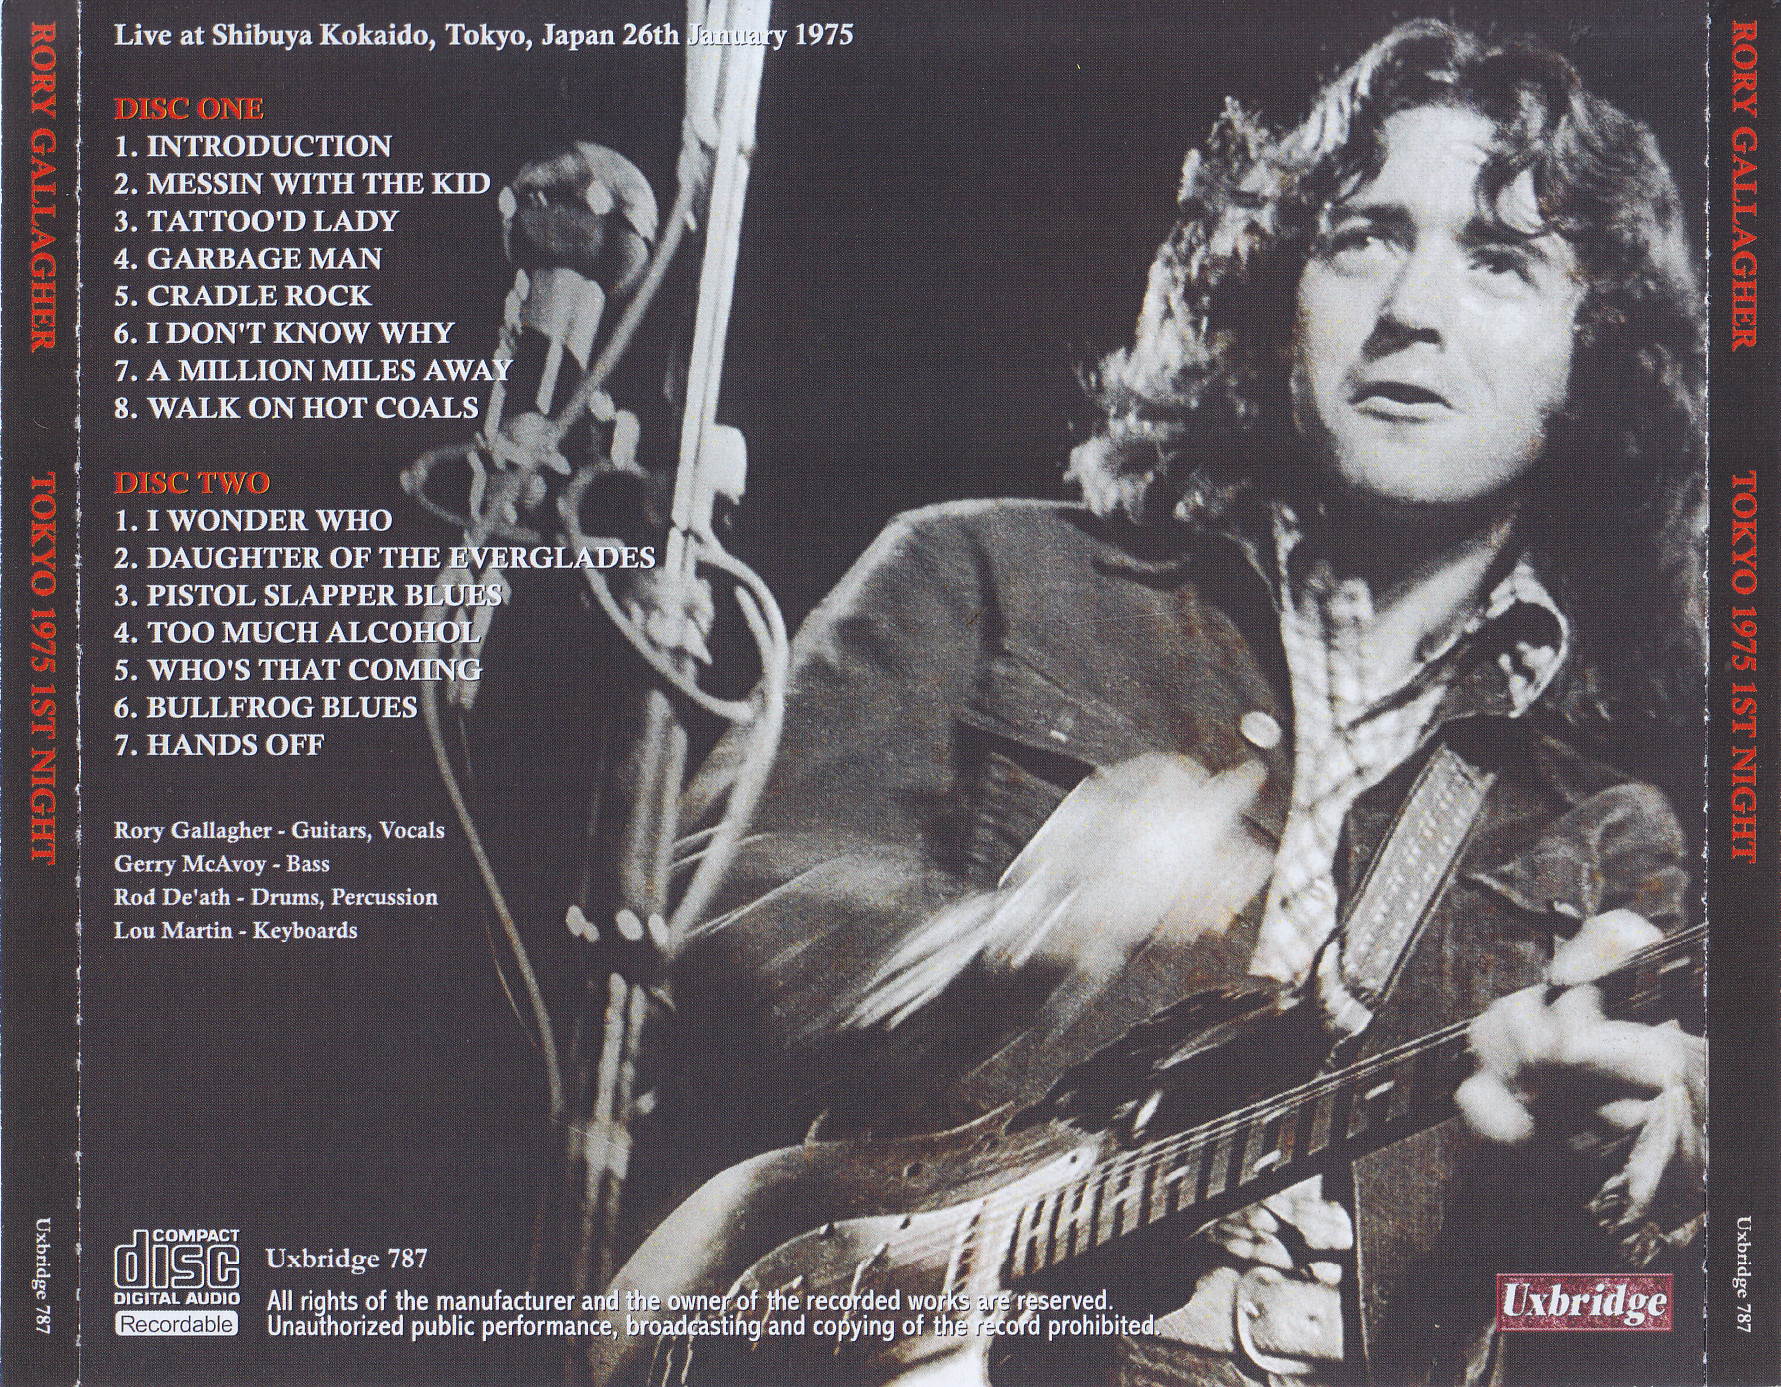 Rory Gallagher / Tokyo 1975 1st Night / 2CDR – GiGinJapan